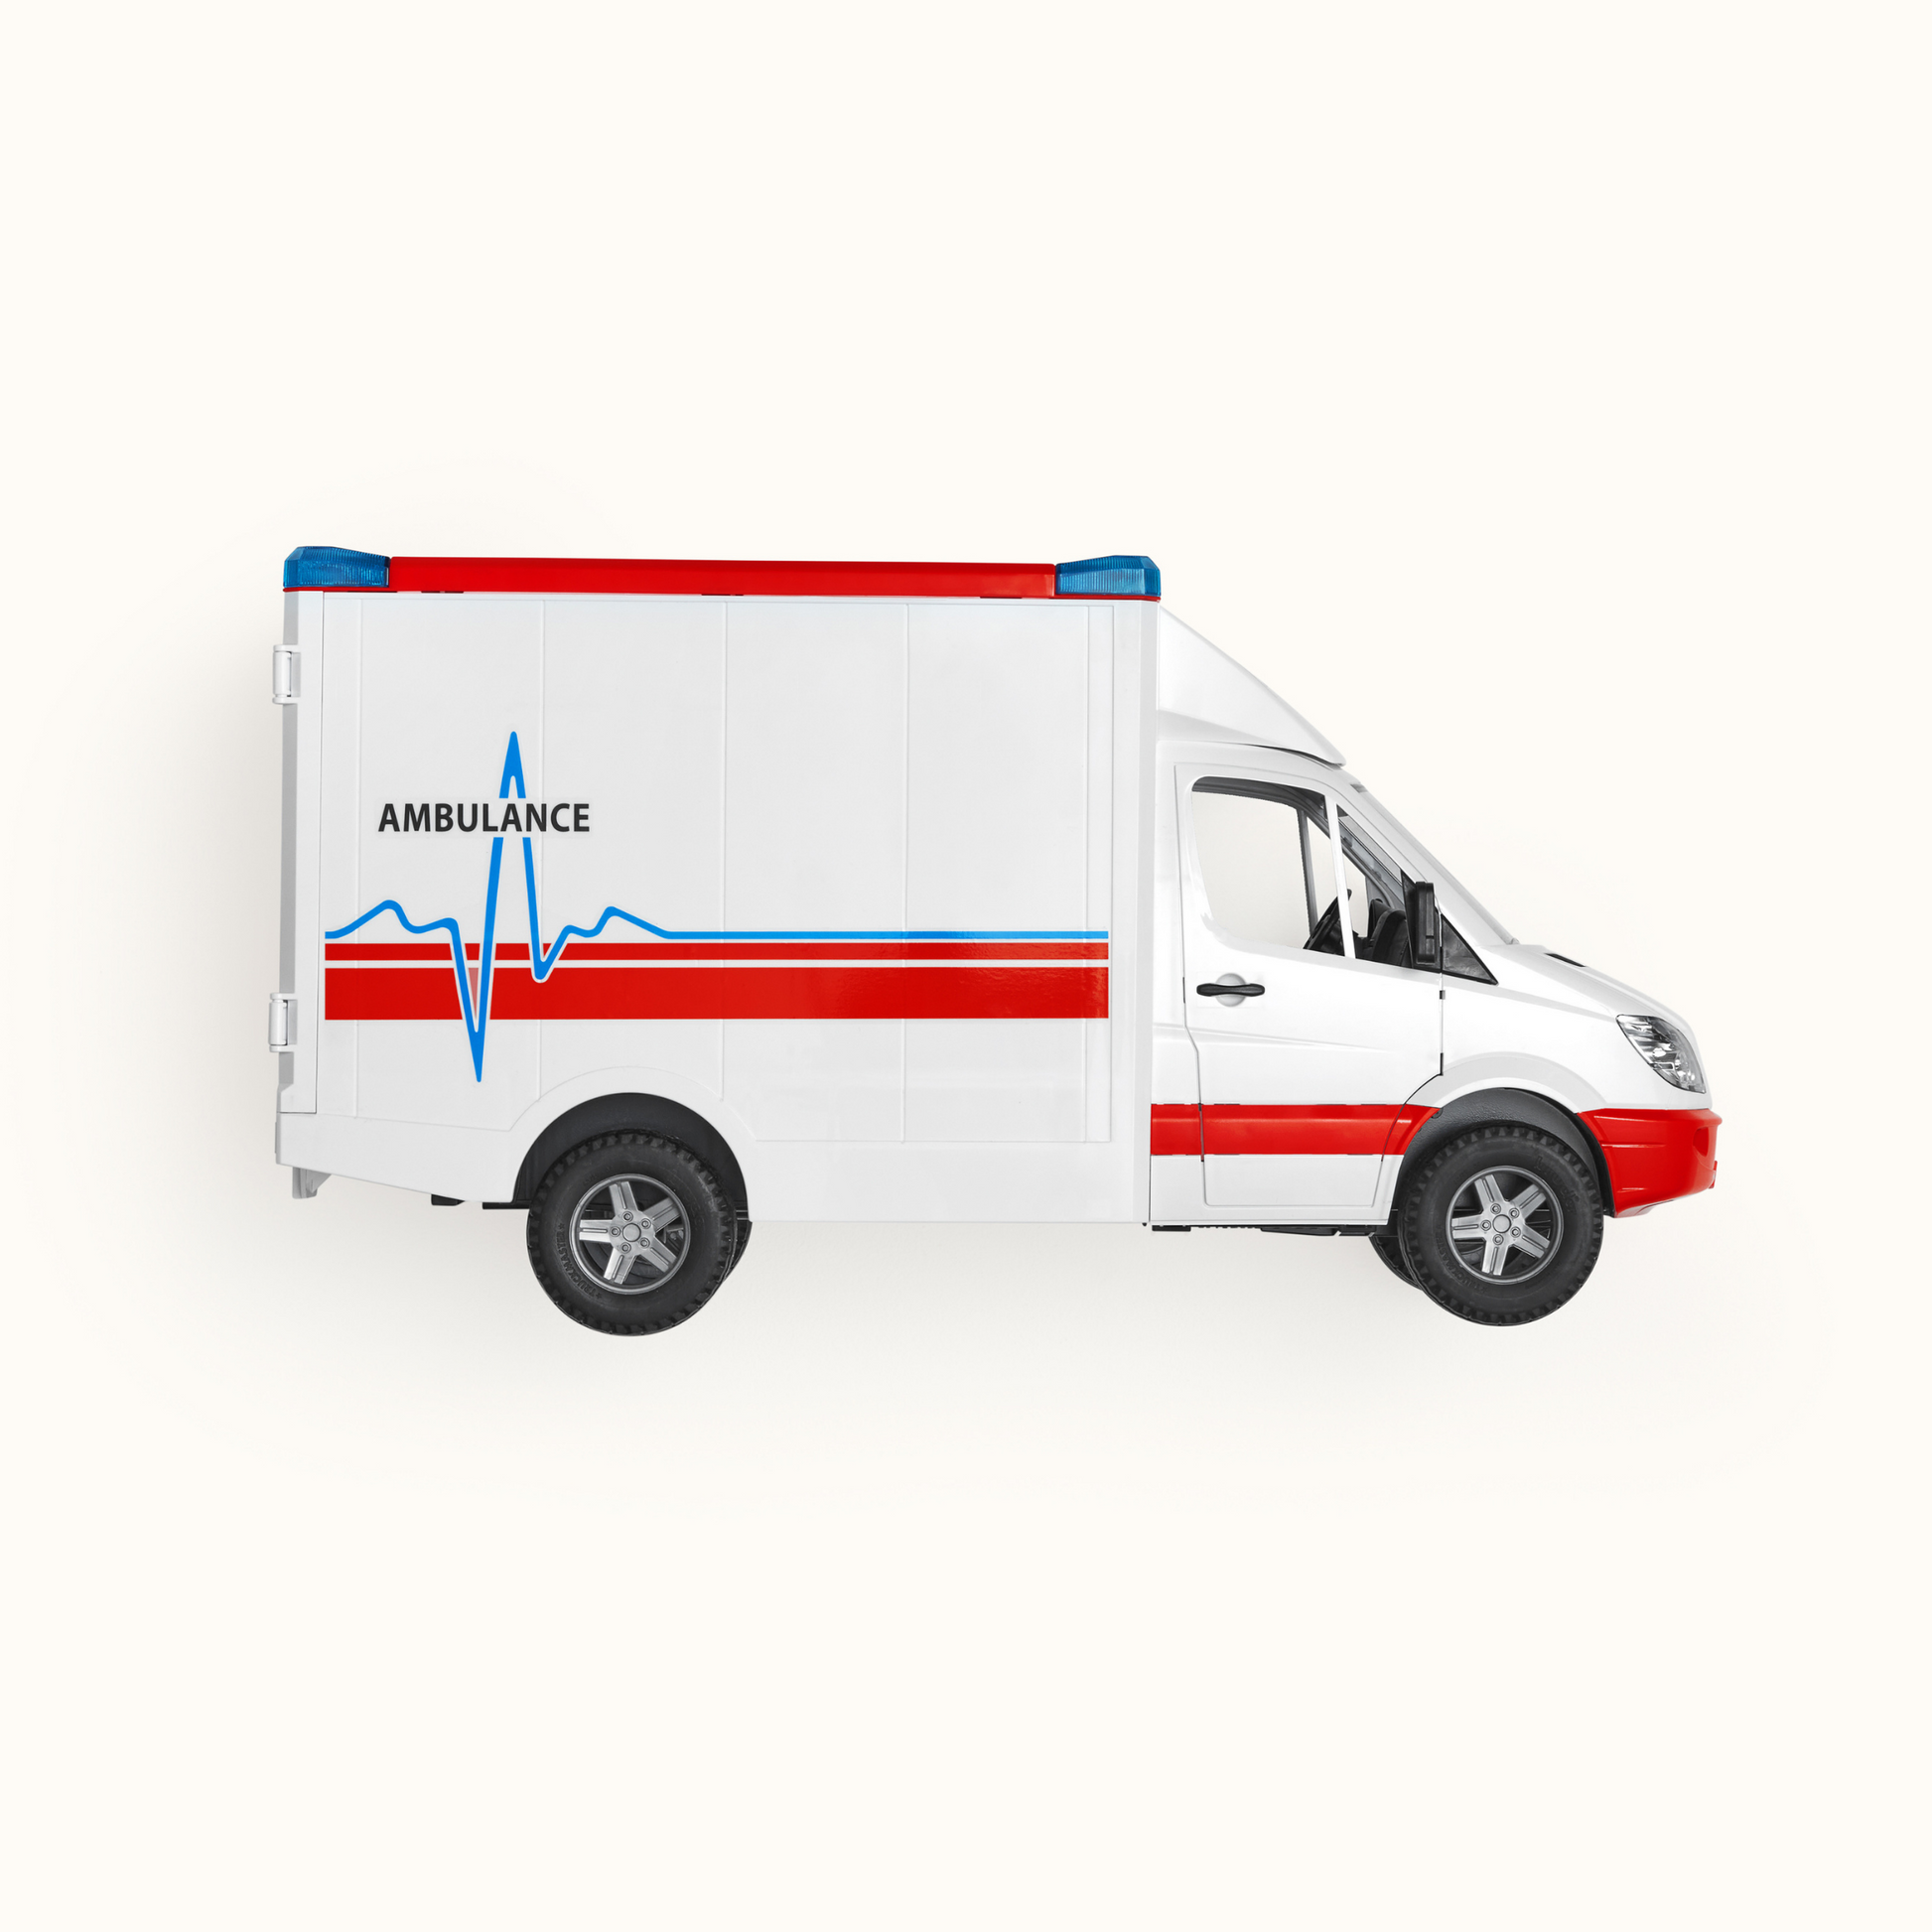 Left side of an ambulance on an empty background.